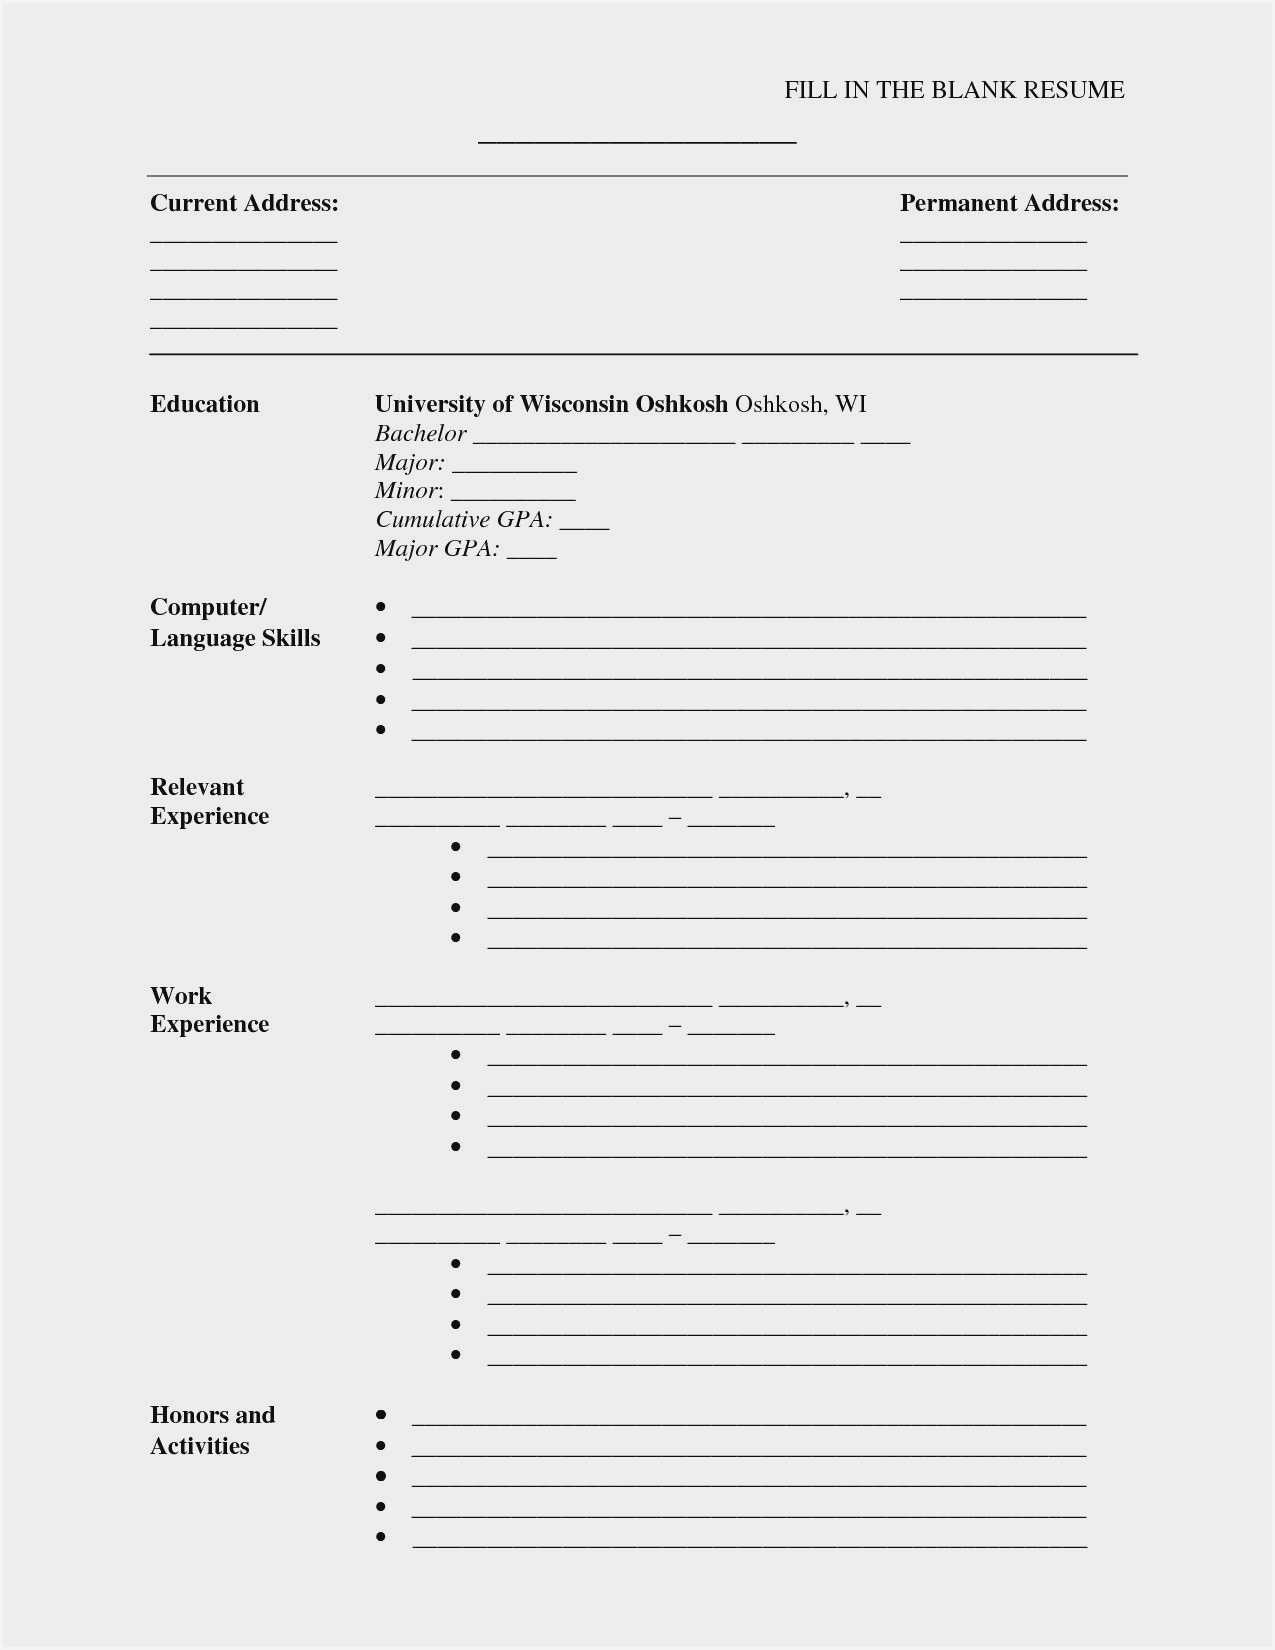 Blank Cv Format Word Download – Resume : Resume Sample #3945 With Regard To Blank Resume Templates For Microsoft Word